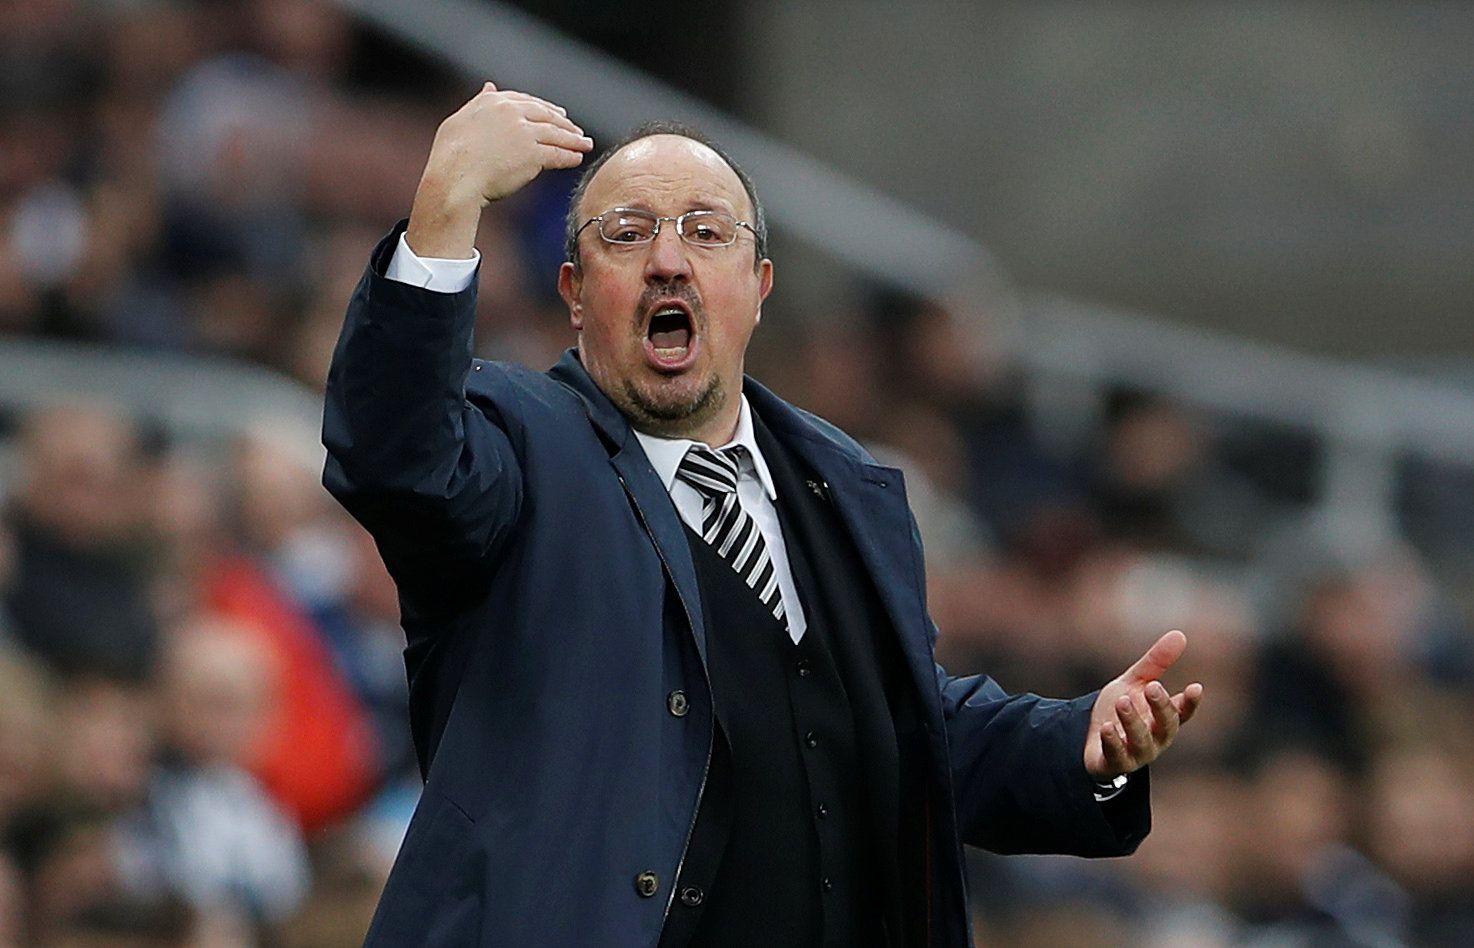 Soccer Football - Premier League - Newcastle United vs Southampton - St James' Park, Newcastle, Britain - March 10, 2018   Newcastle United manager Rafael Benitez gestures   Action Images via Reuters/Lee Smith    EDITORIAL USE ONLY. No use with unauthorized audio, video, data, fixture lists, club/league logos or 